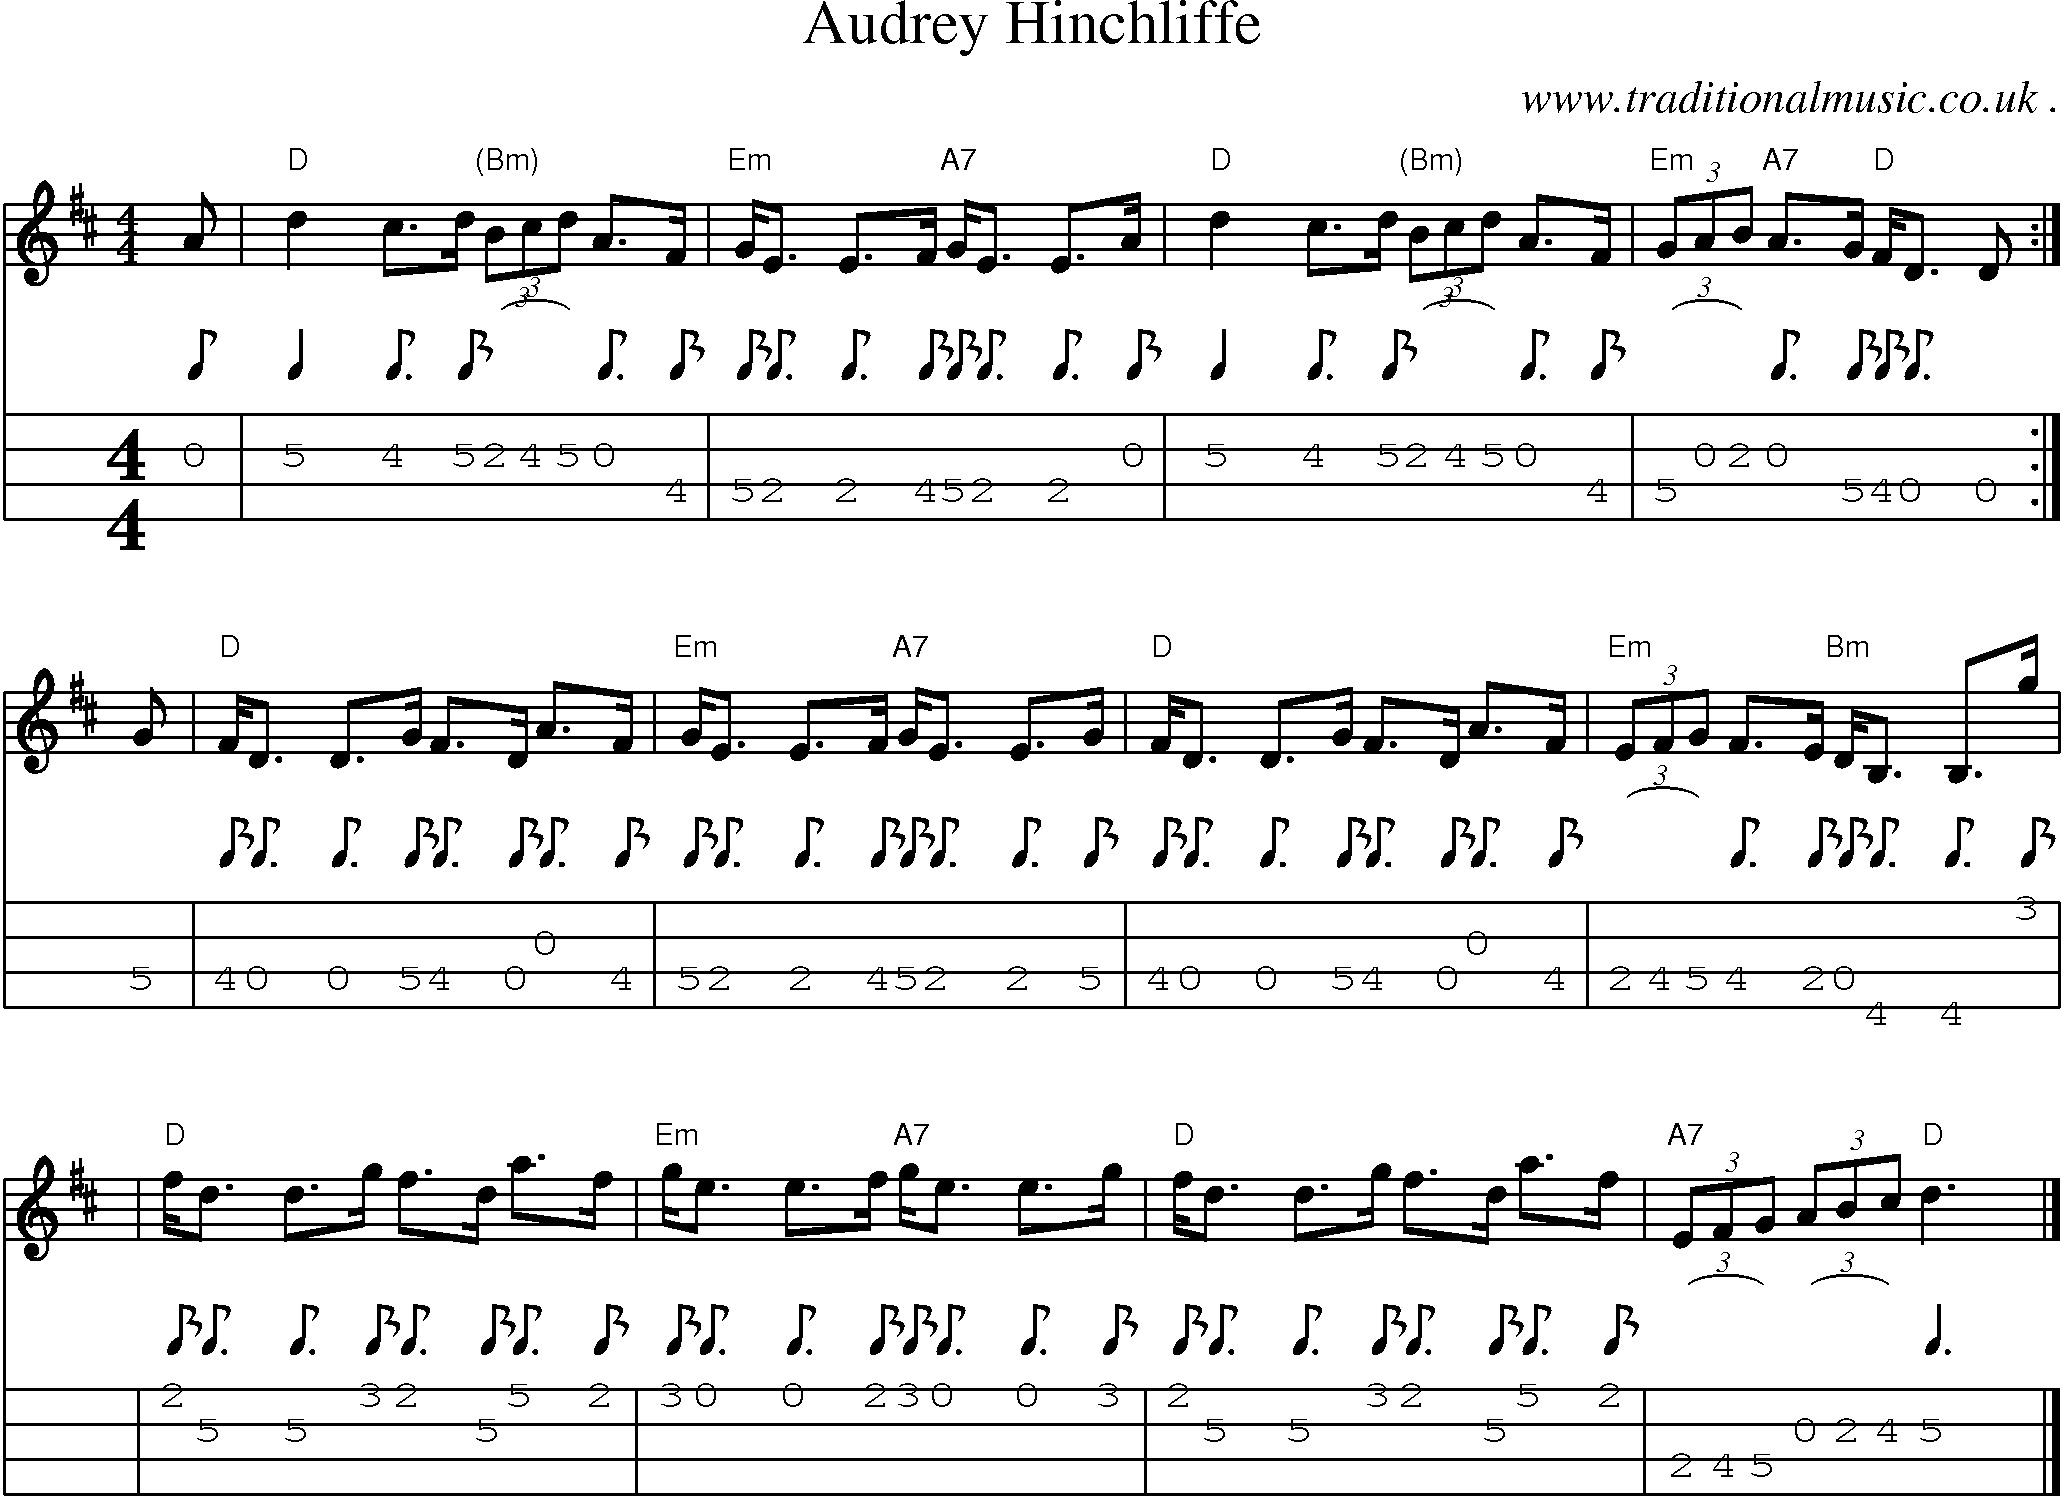 Sheet-music  score, Chords and Mandolin Tabs for Audrey Hinchliffe